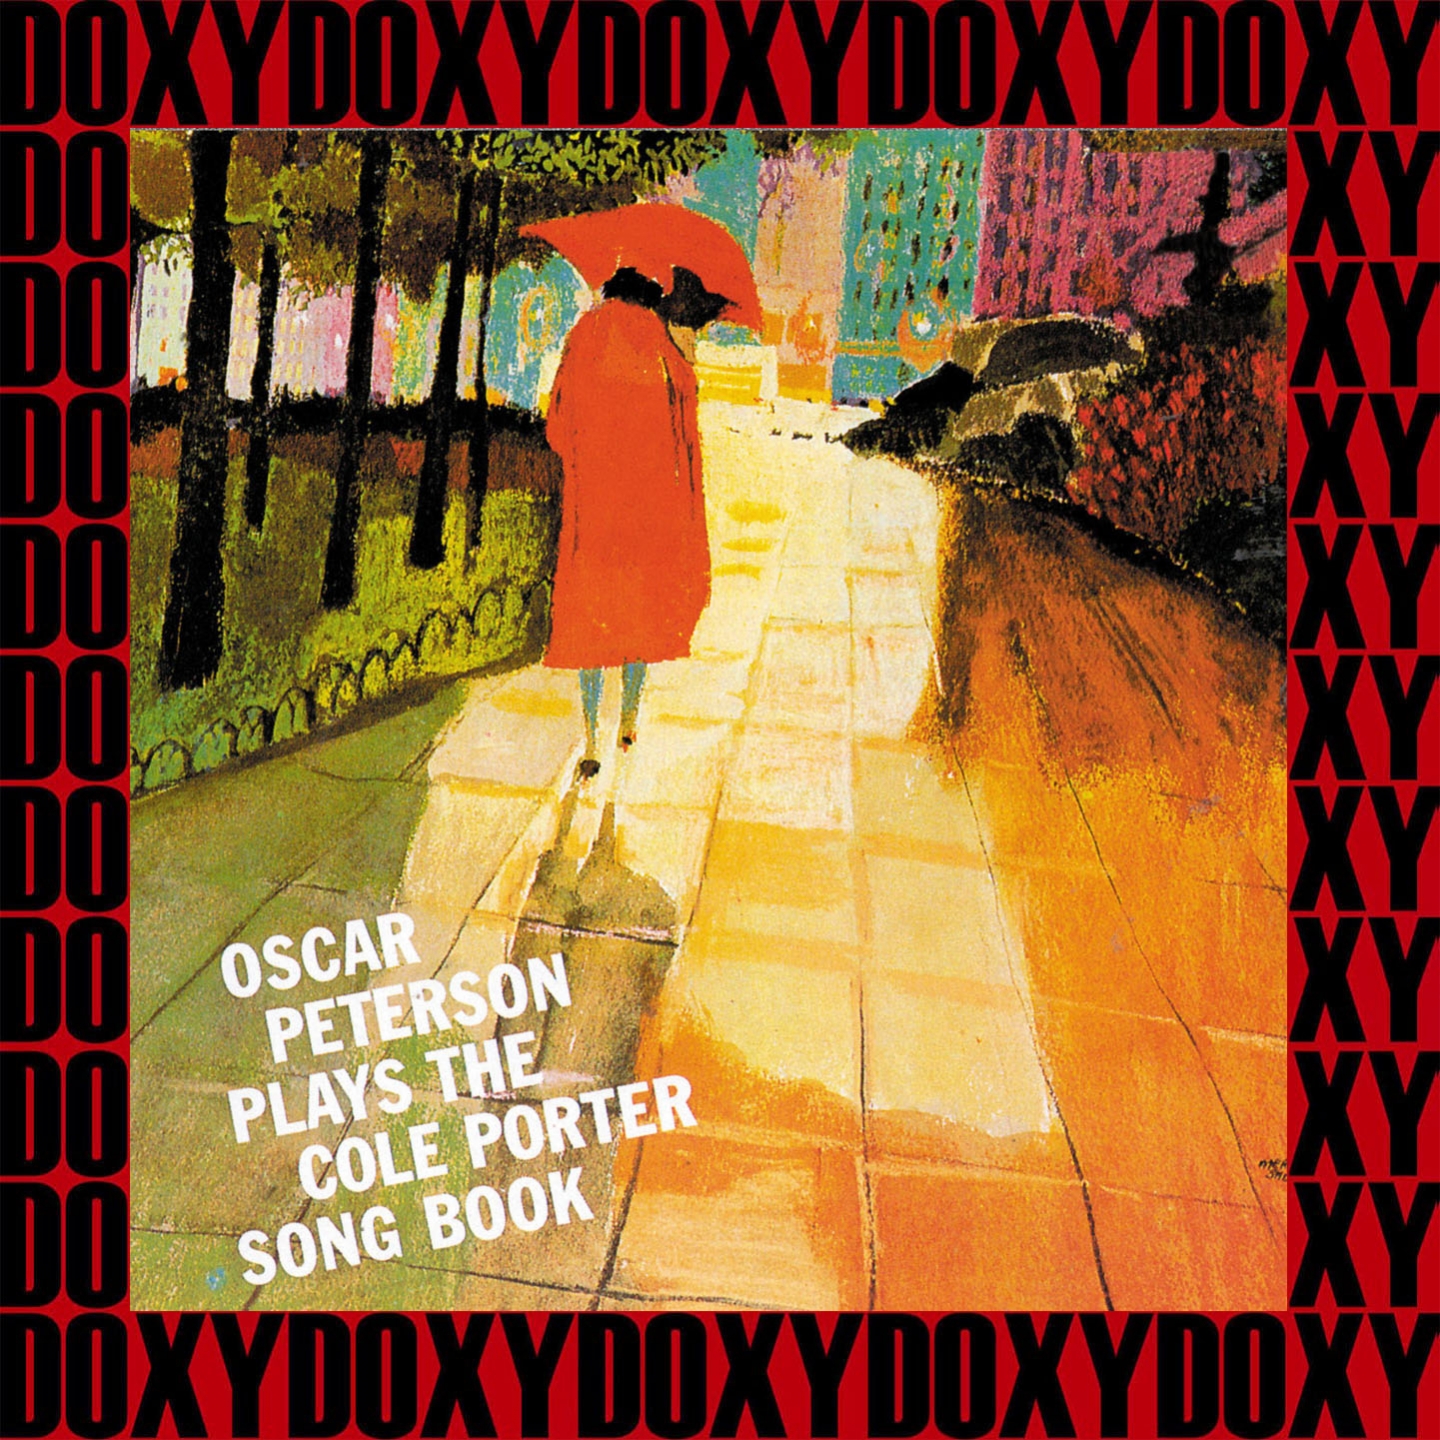 Plays The Cole Porter Song Book (Remastered Version) (Doxy Collection)